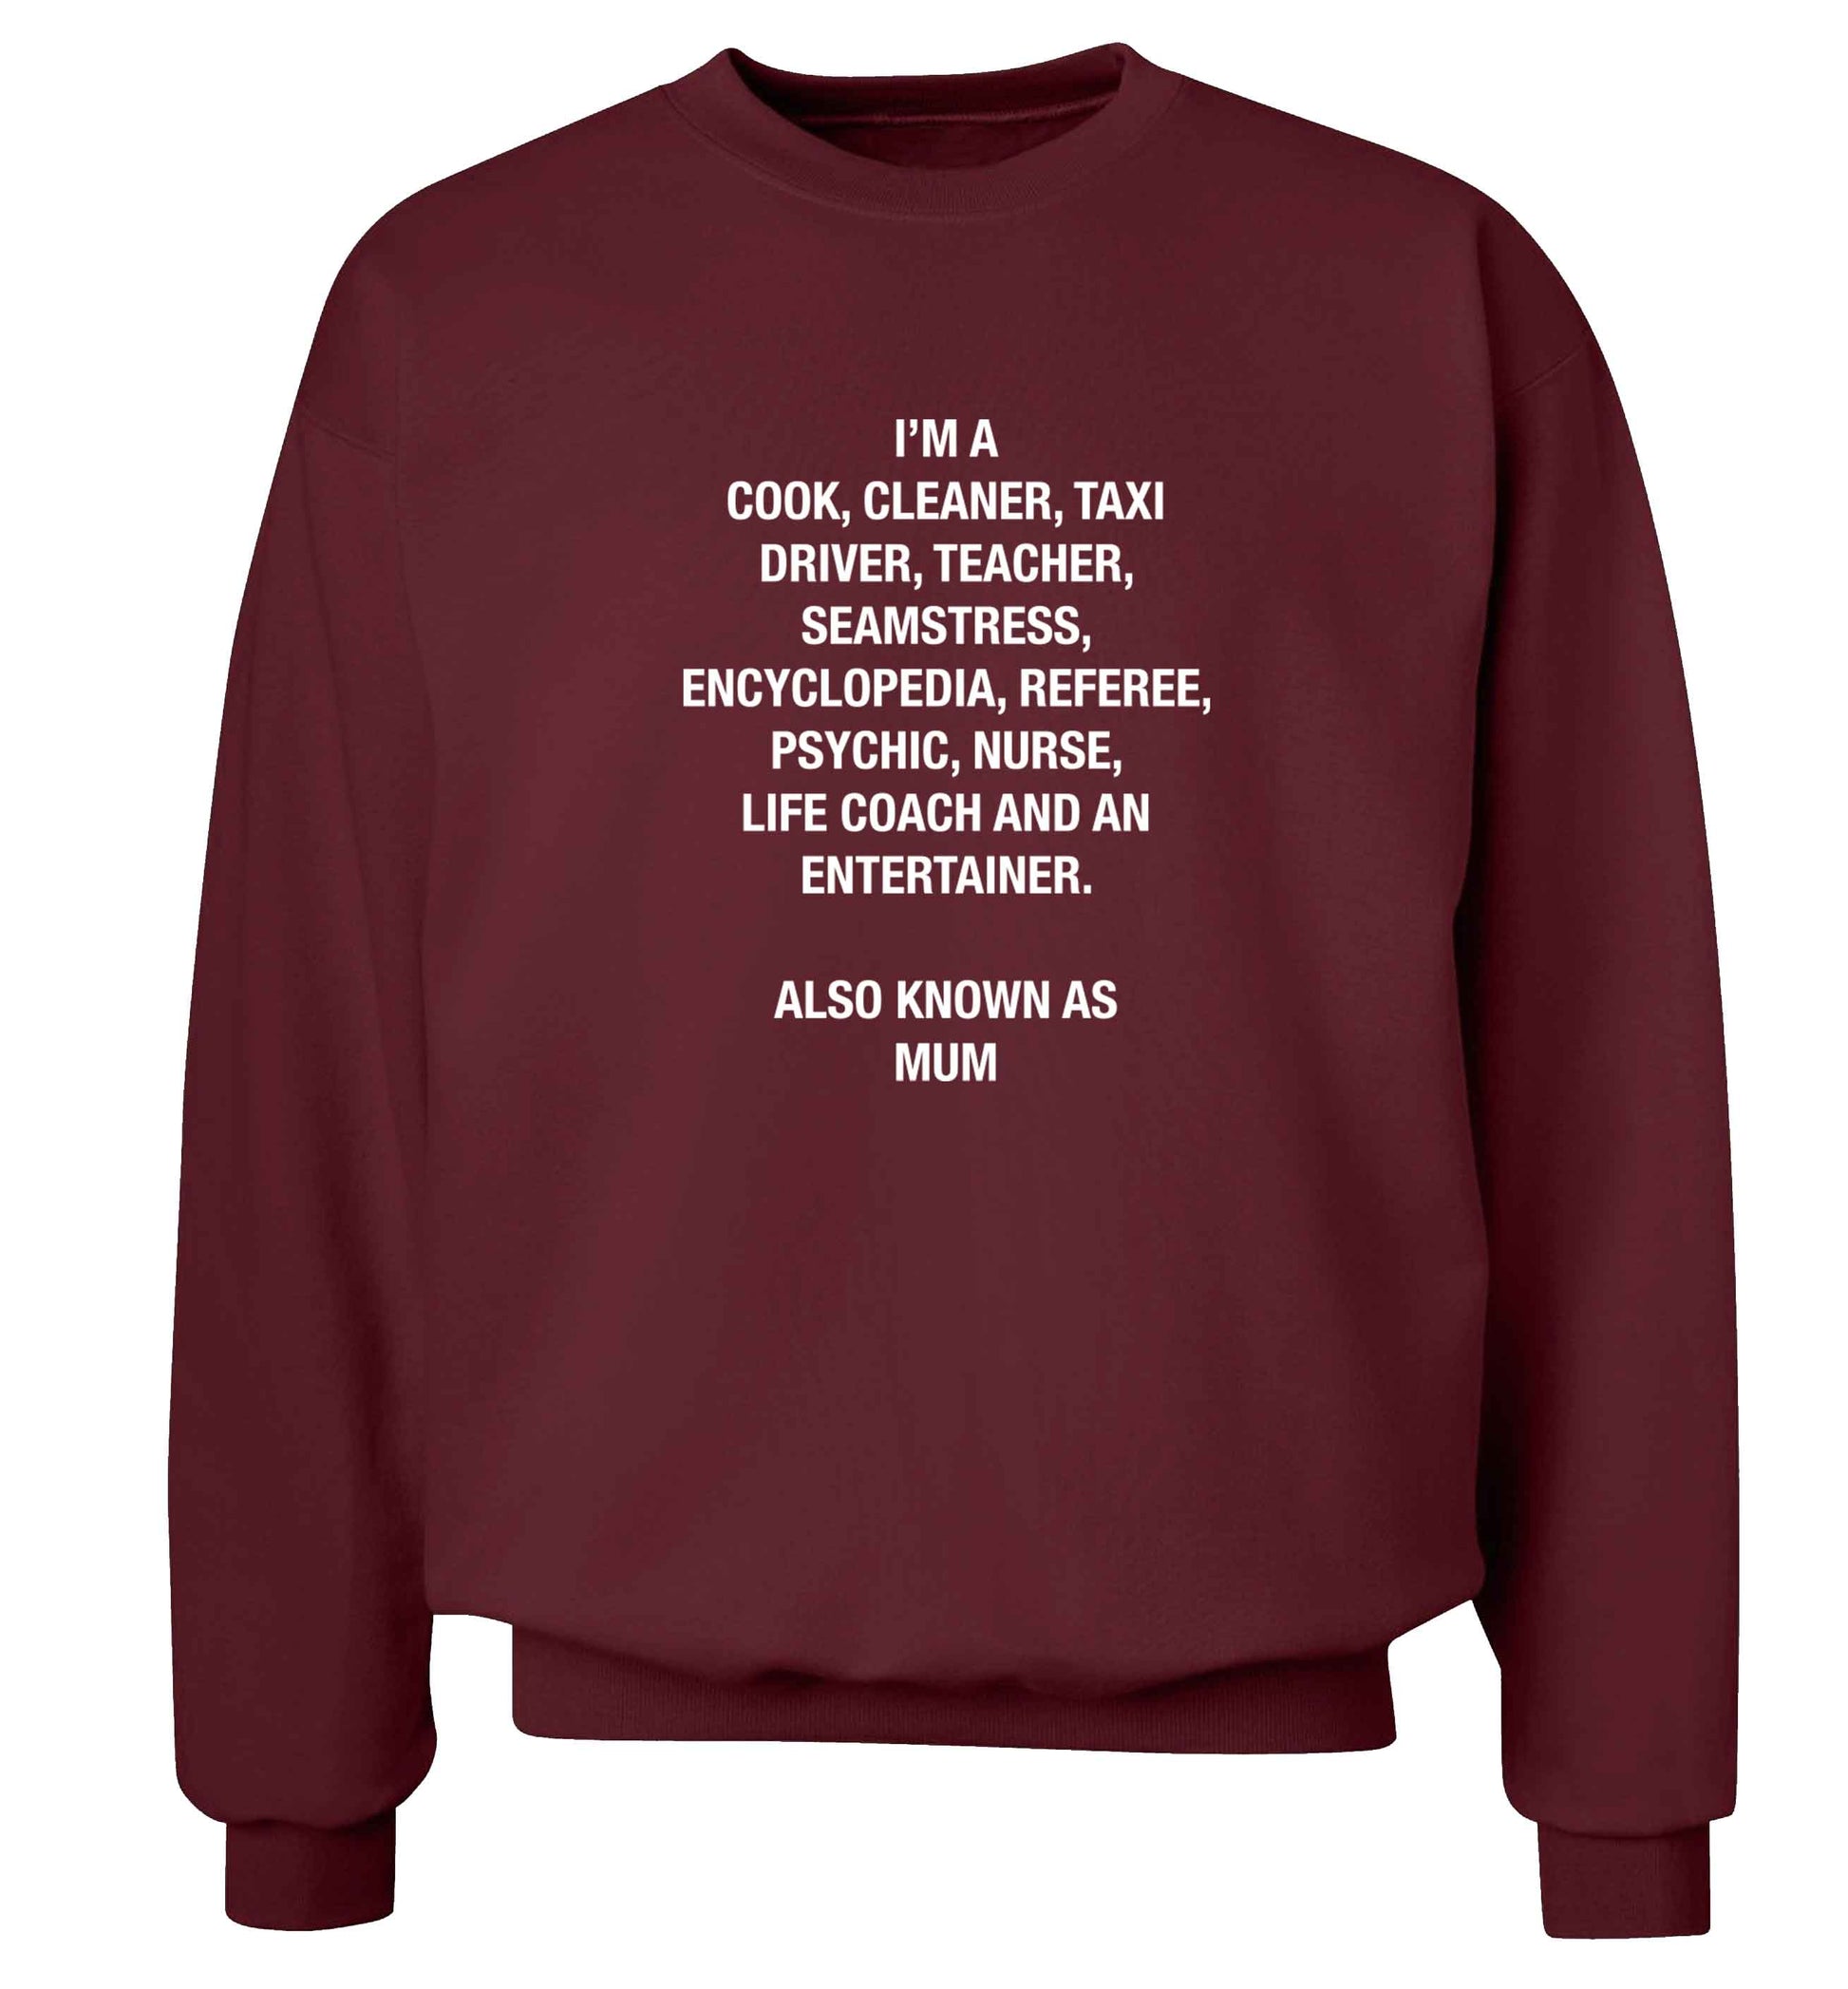 Funny gifts for your mum on mother's dayor her birthday! Mum, cook, cleaner, taxi driver, teacher, seamstress, encyclopedia, referee, psychic, nurse, life coach and entertainer adult's unisex maroon sweater 2XL